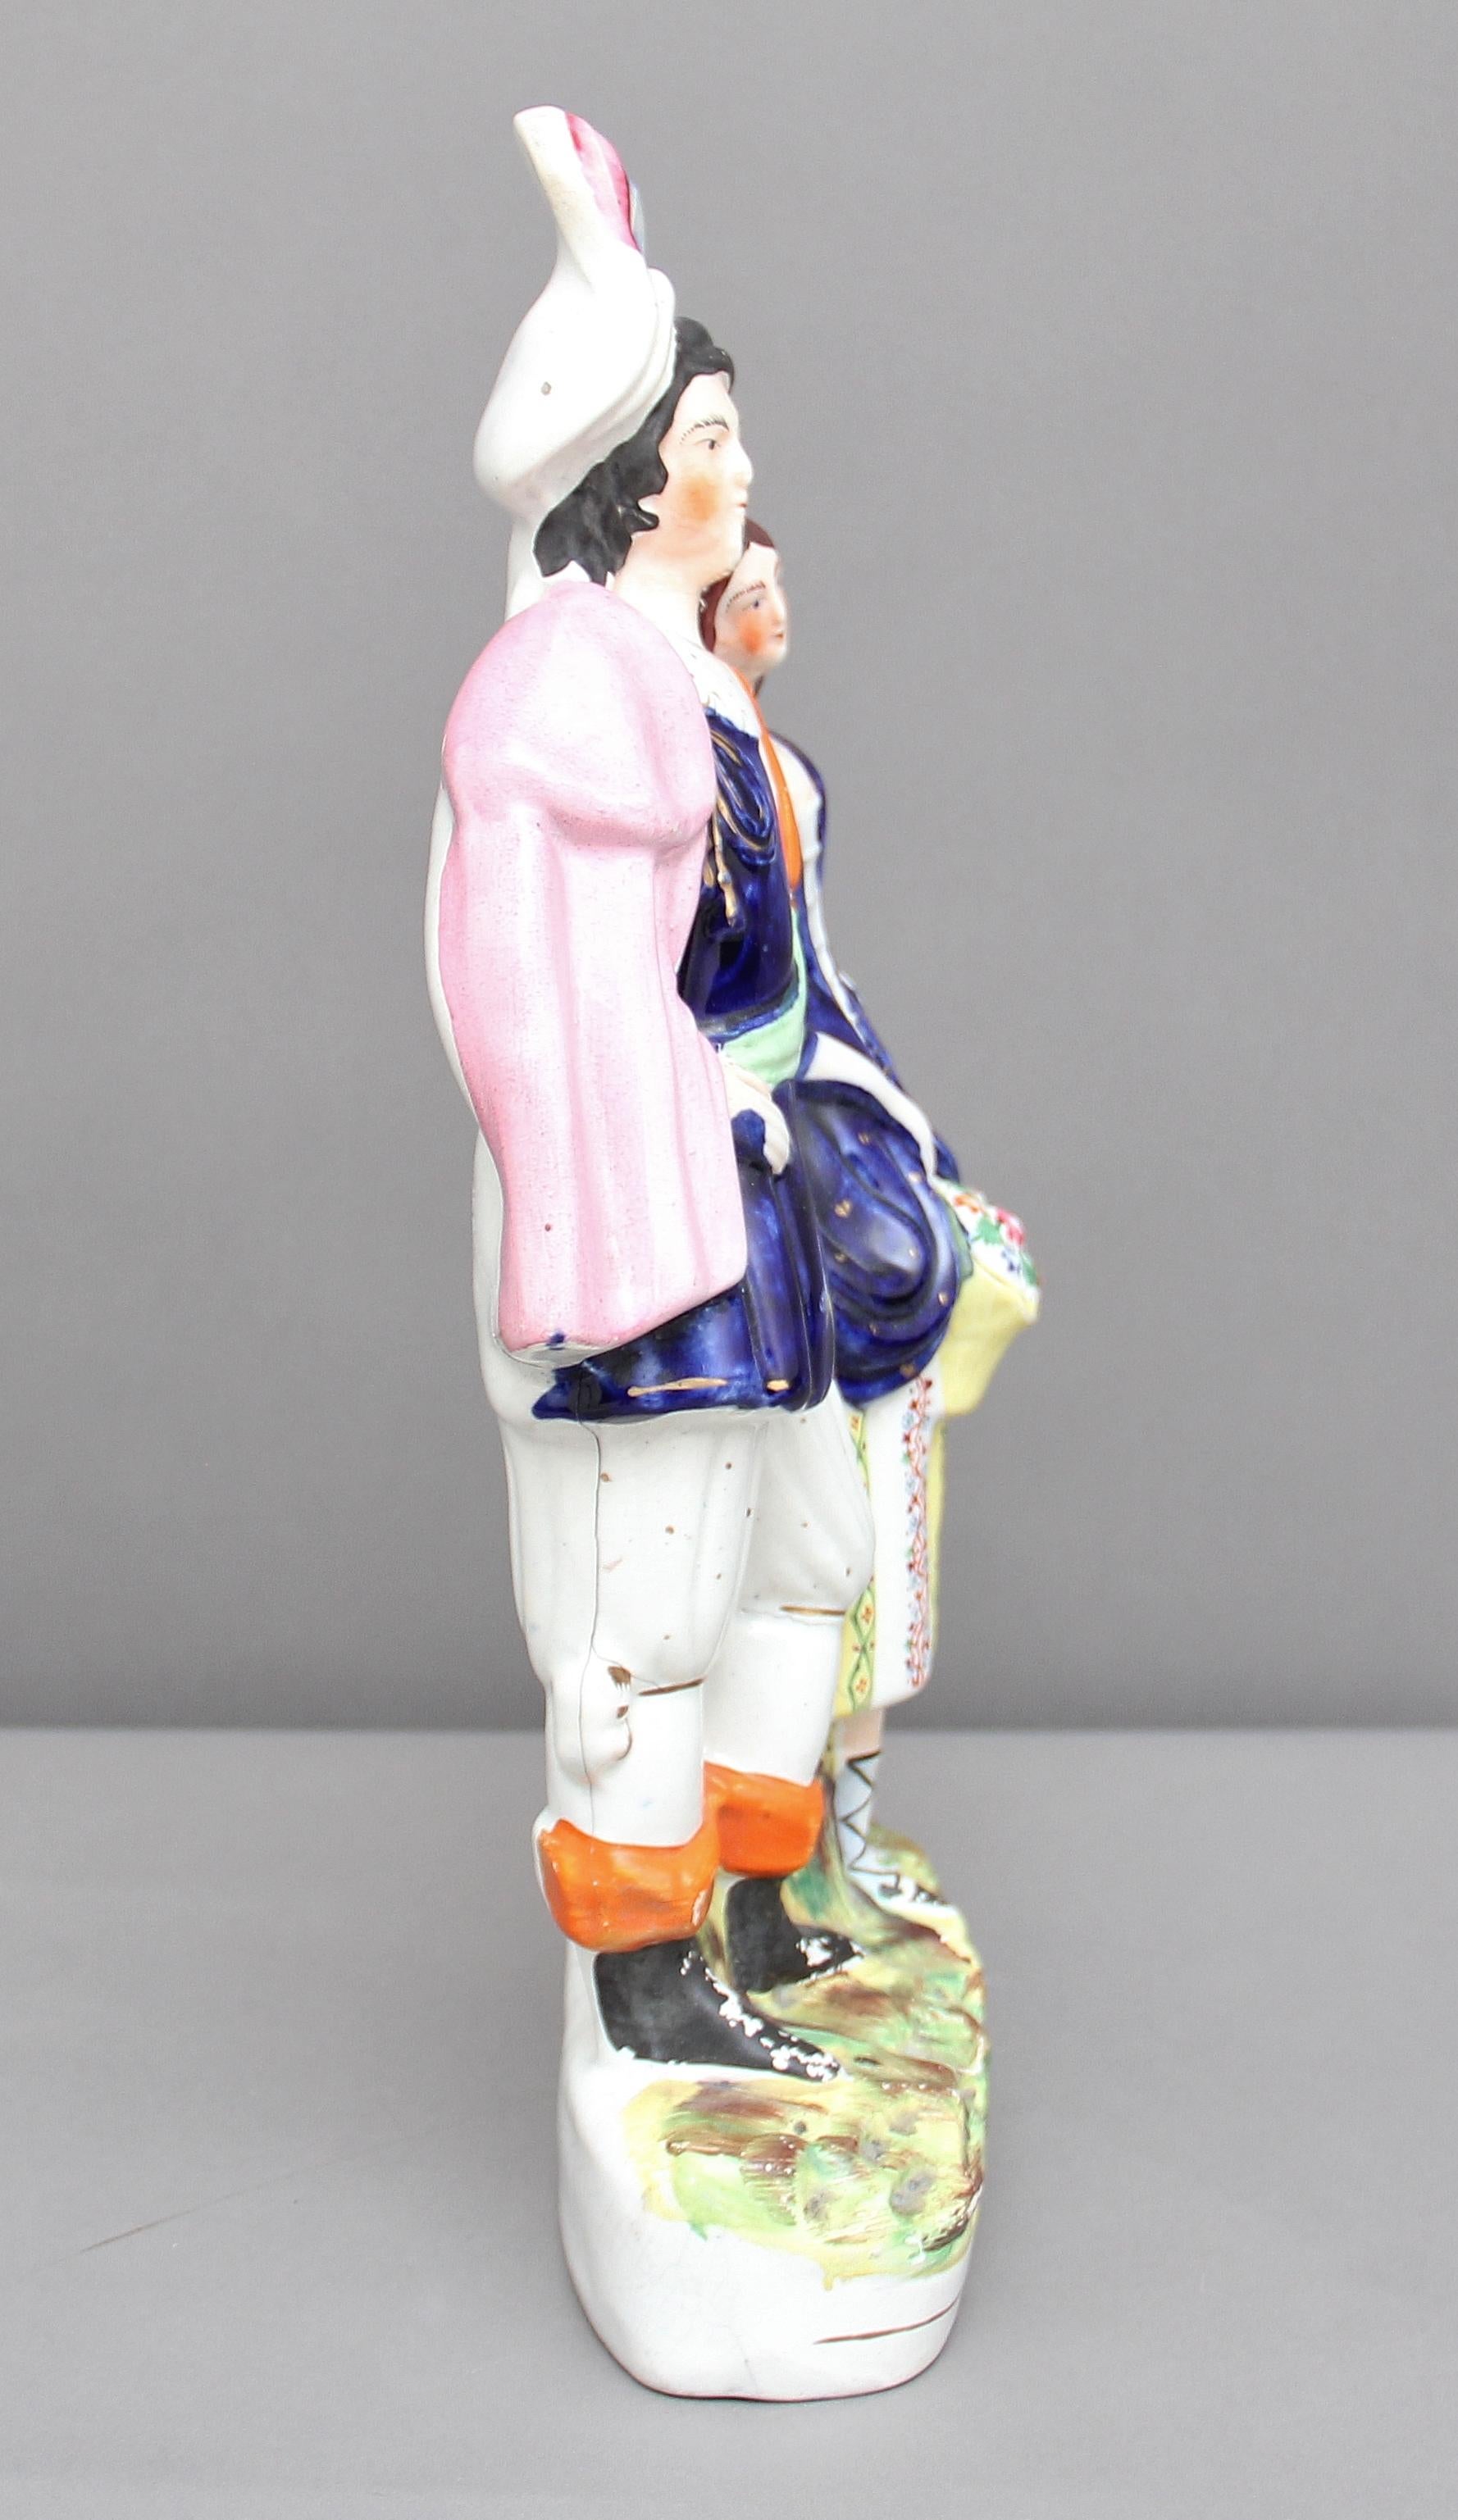 19th century Staffordshire figure of a man and woman, the woman holding a basket of flowers, good colors but sadly some cracks, circa 1850.